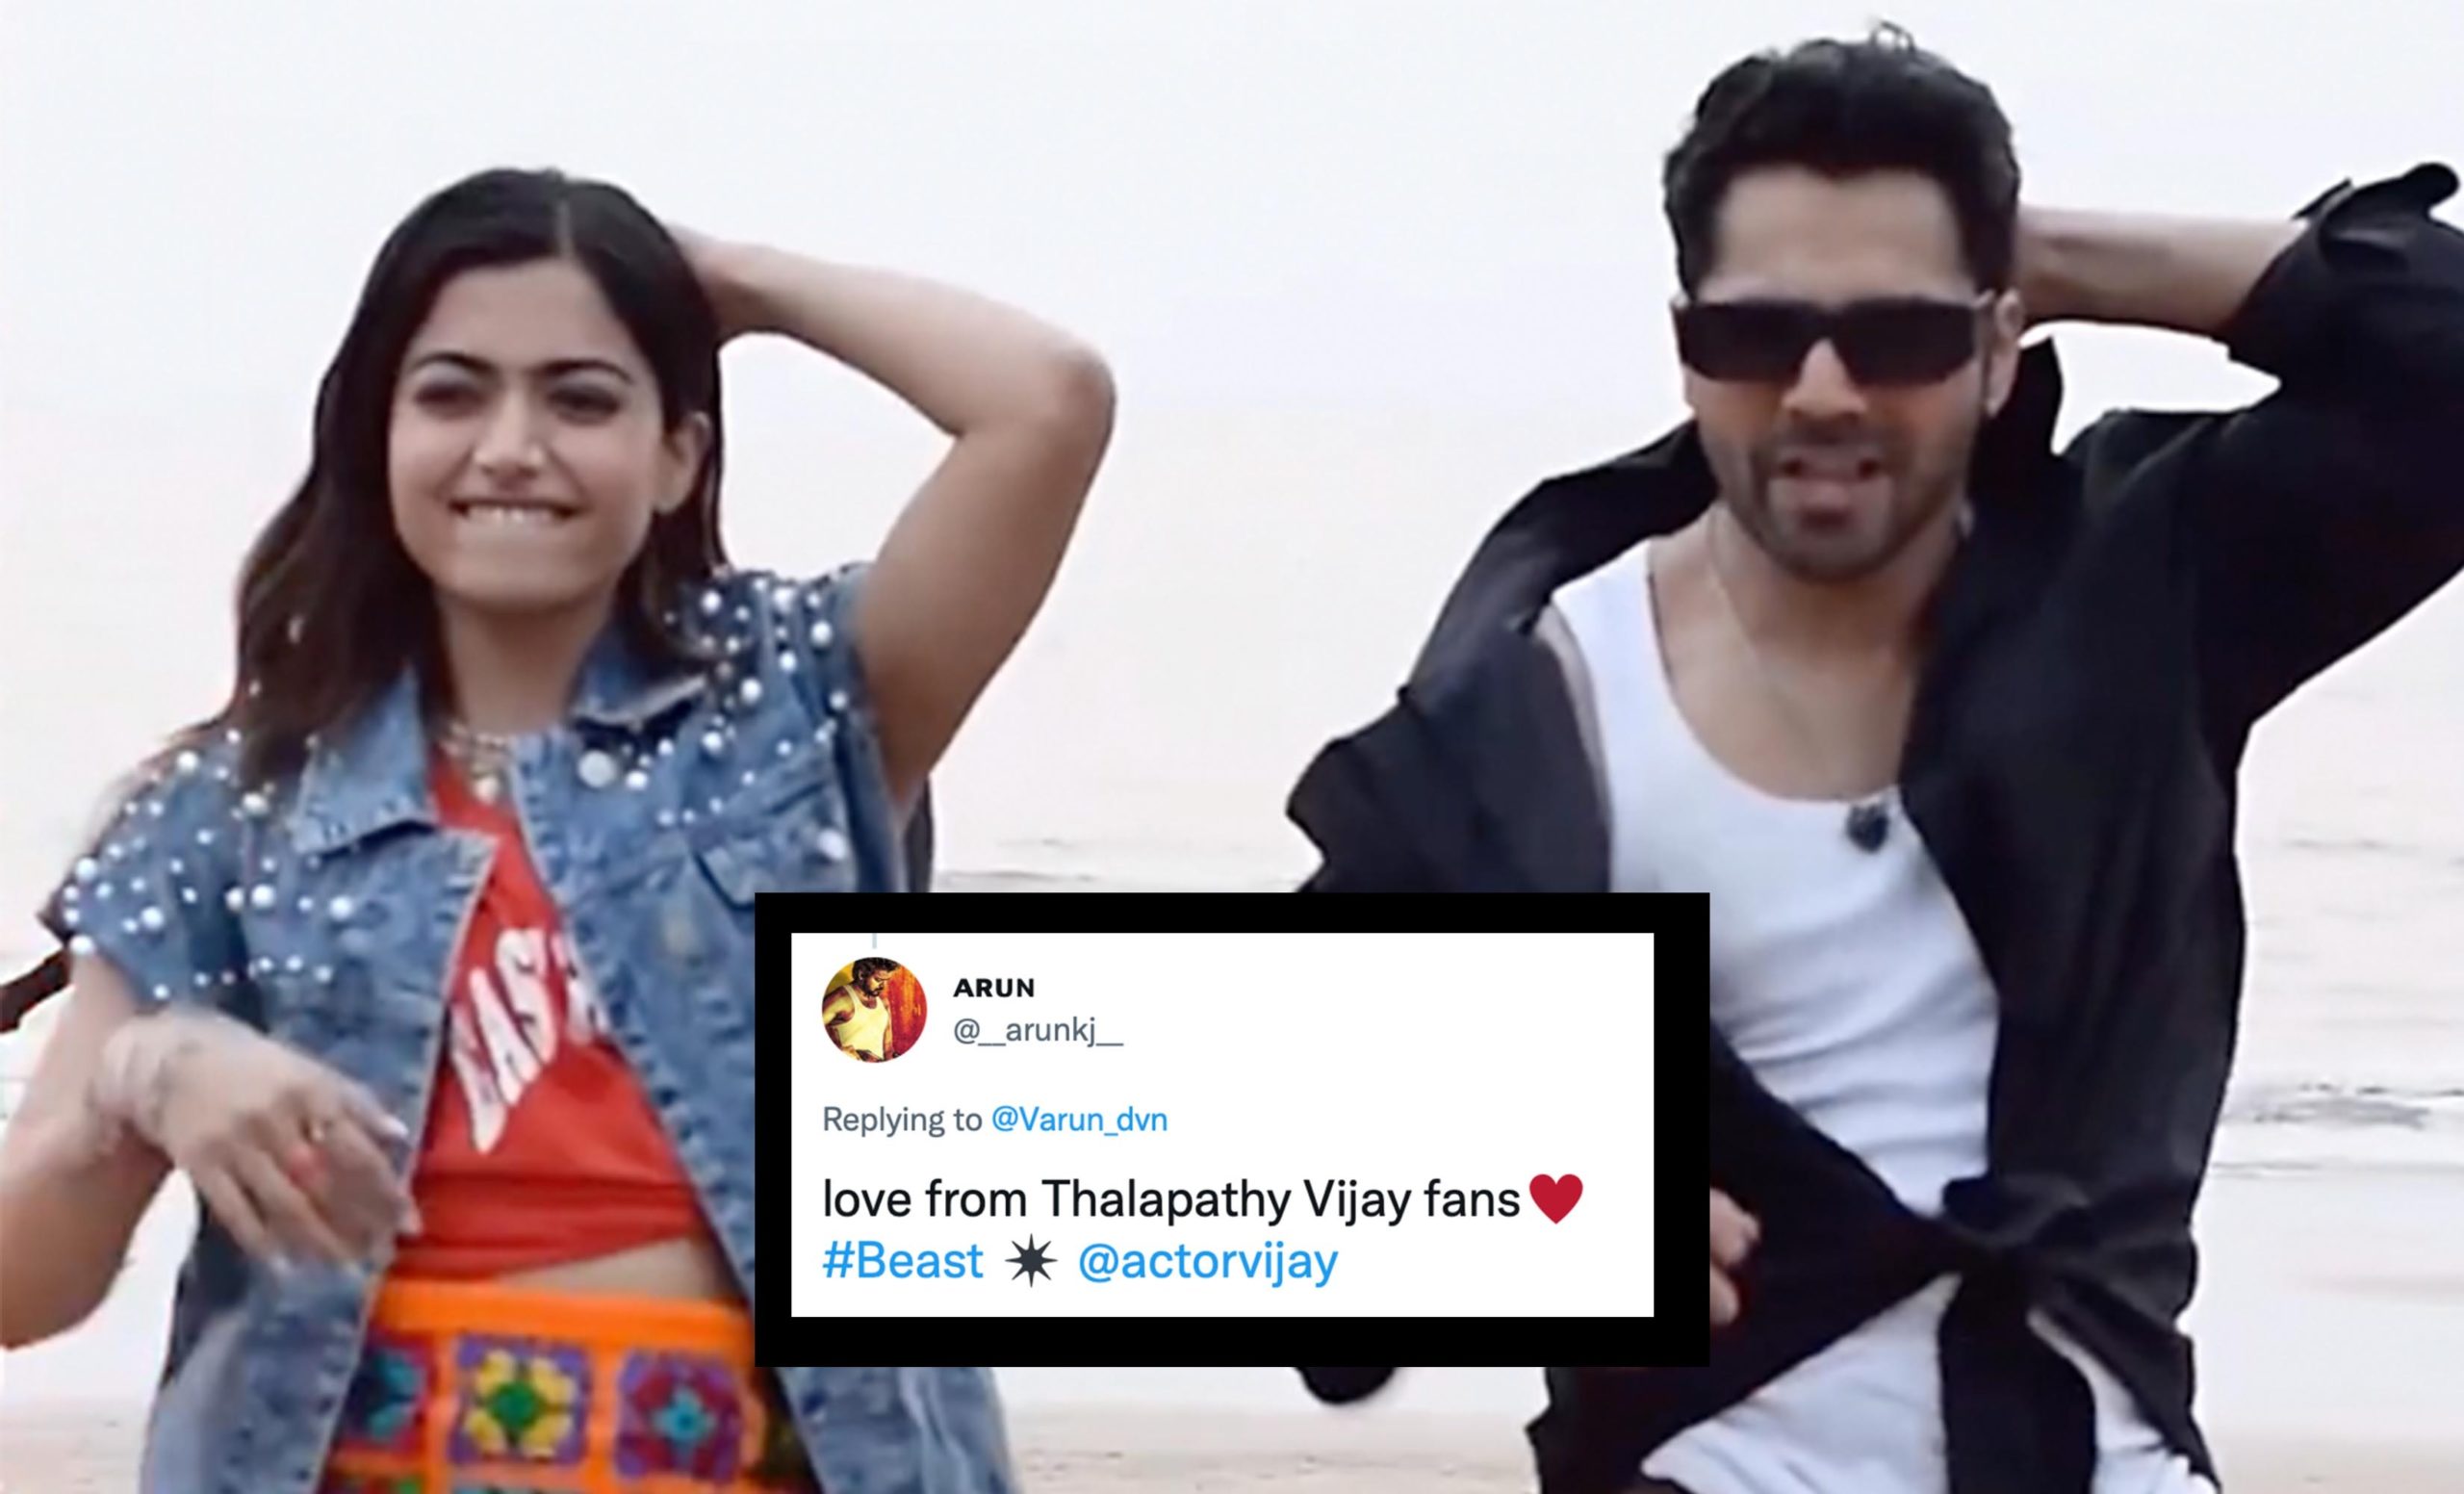 Rashmika Mandanna And Varun Dhawan Dance To Arabic Kuthu And Fans Of Vijay Can’t Help But Gush About Their Moves